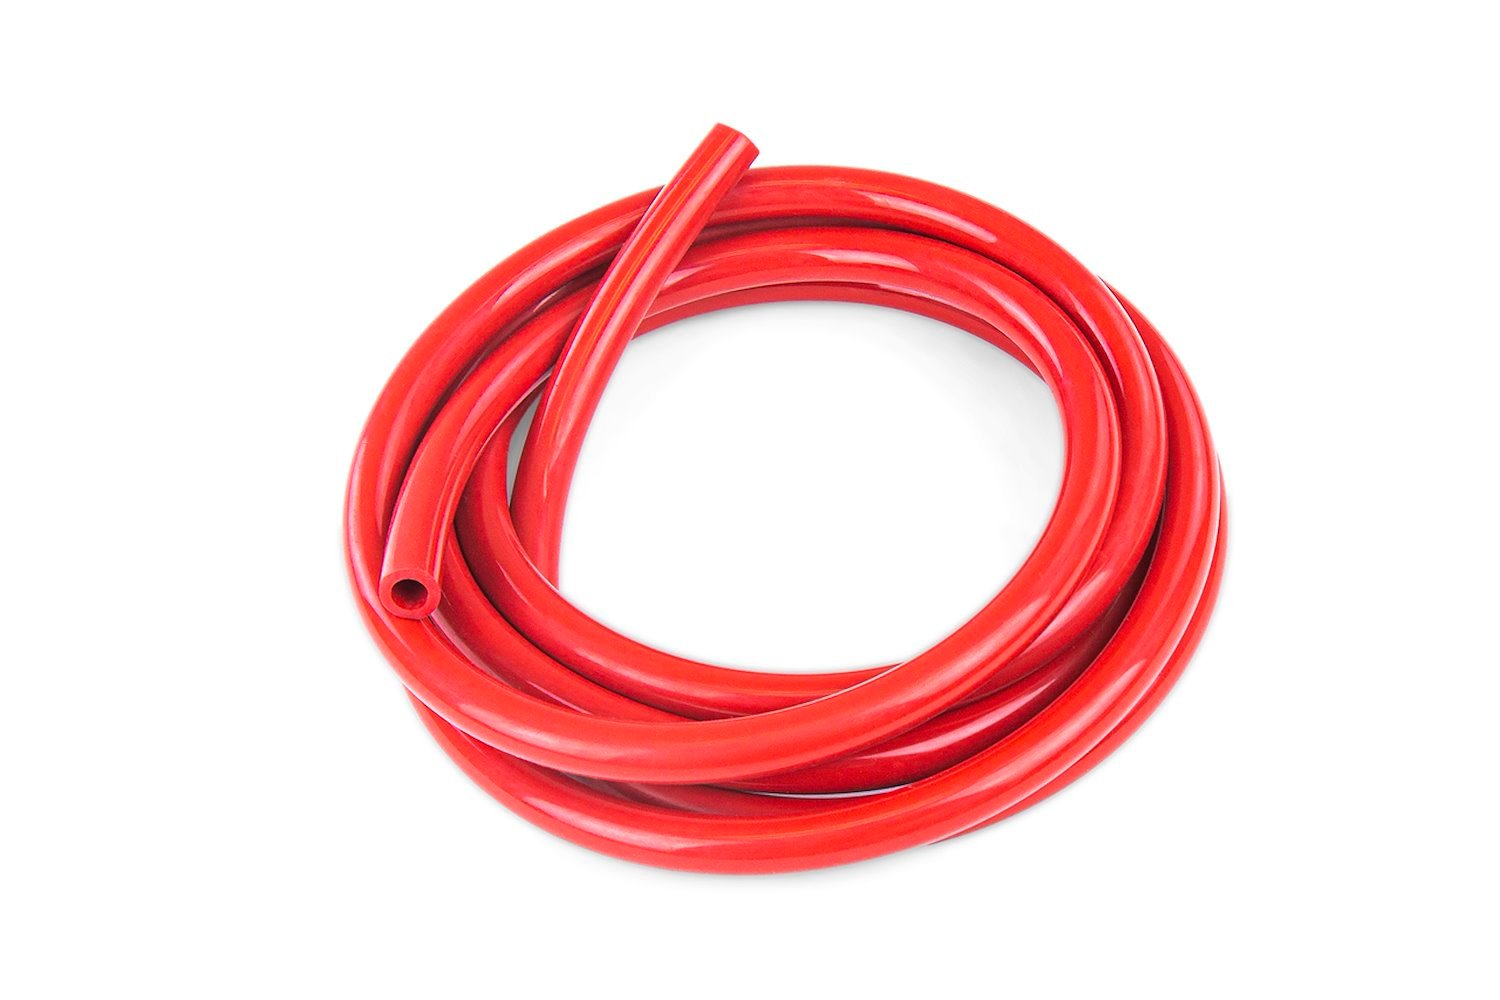 HTSVH127-REDx25 High-Temperature Silicone Vacuum Hose Tubing, 1/2 in. ID, 25 ft. Roll, Red